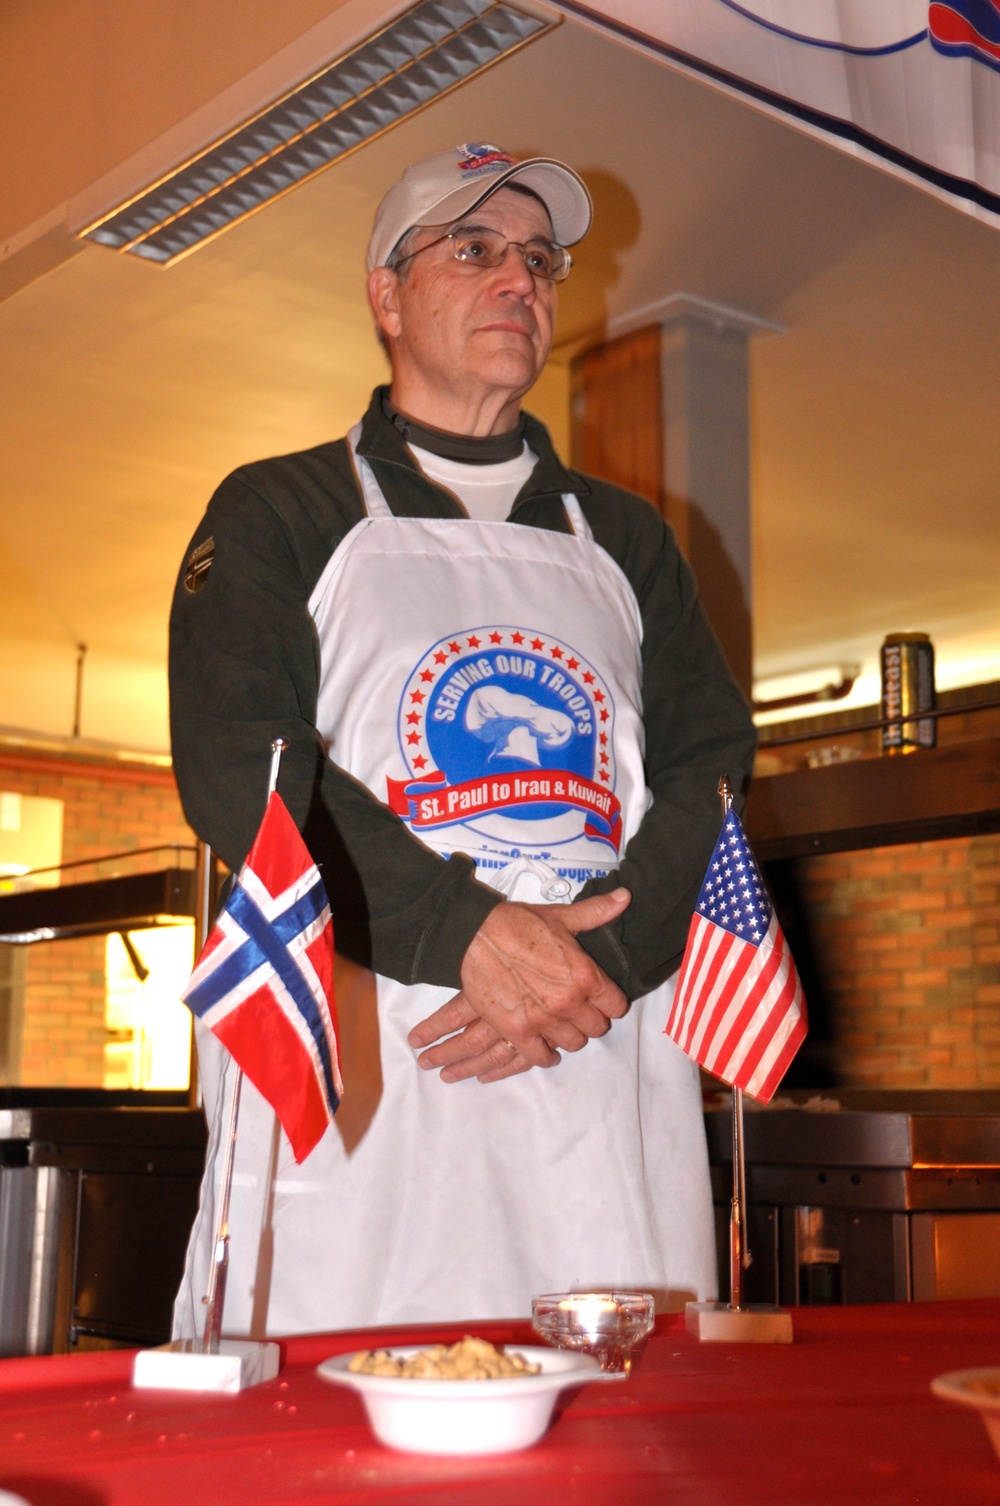 Serving Our Troops thanks Minnesotans serving in Norway